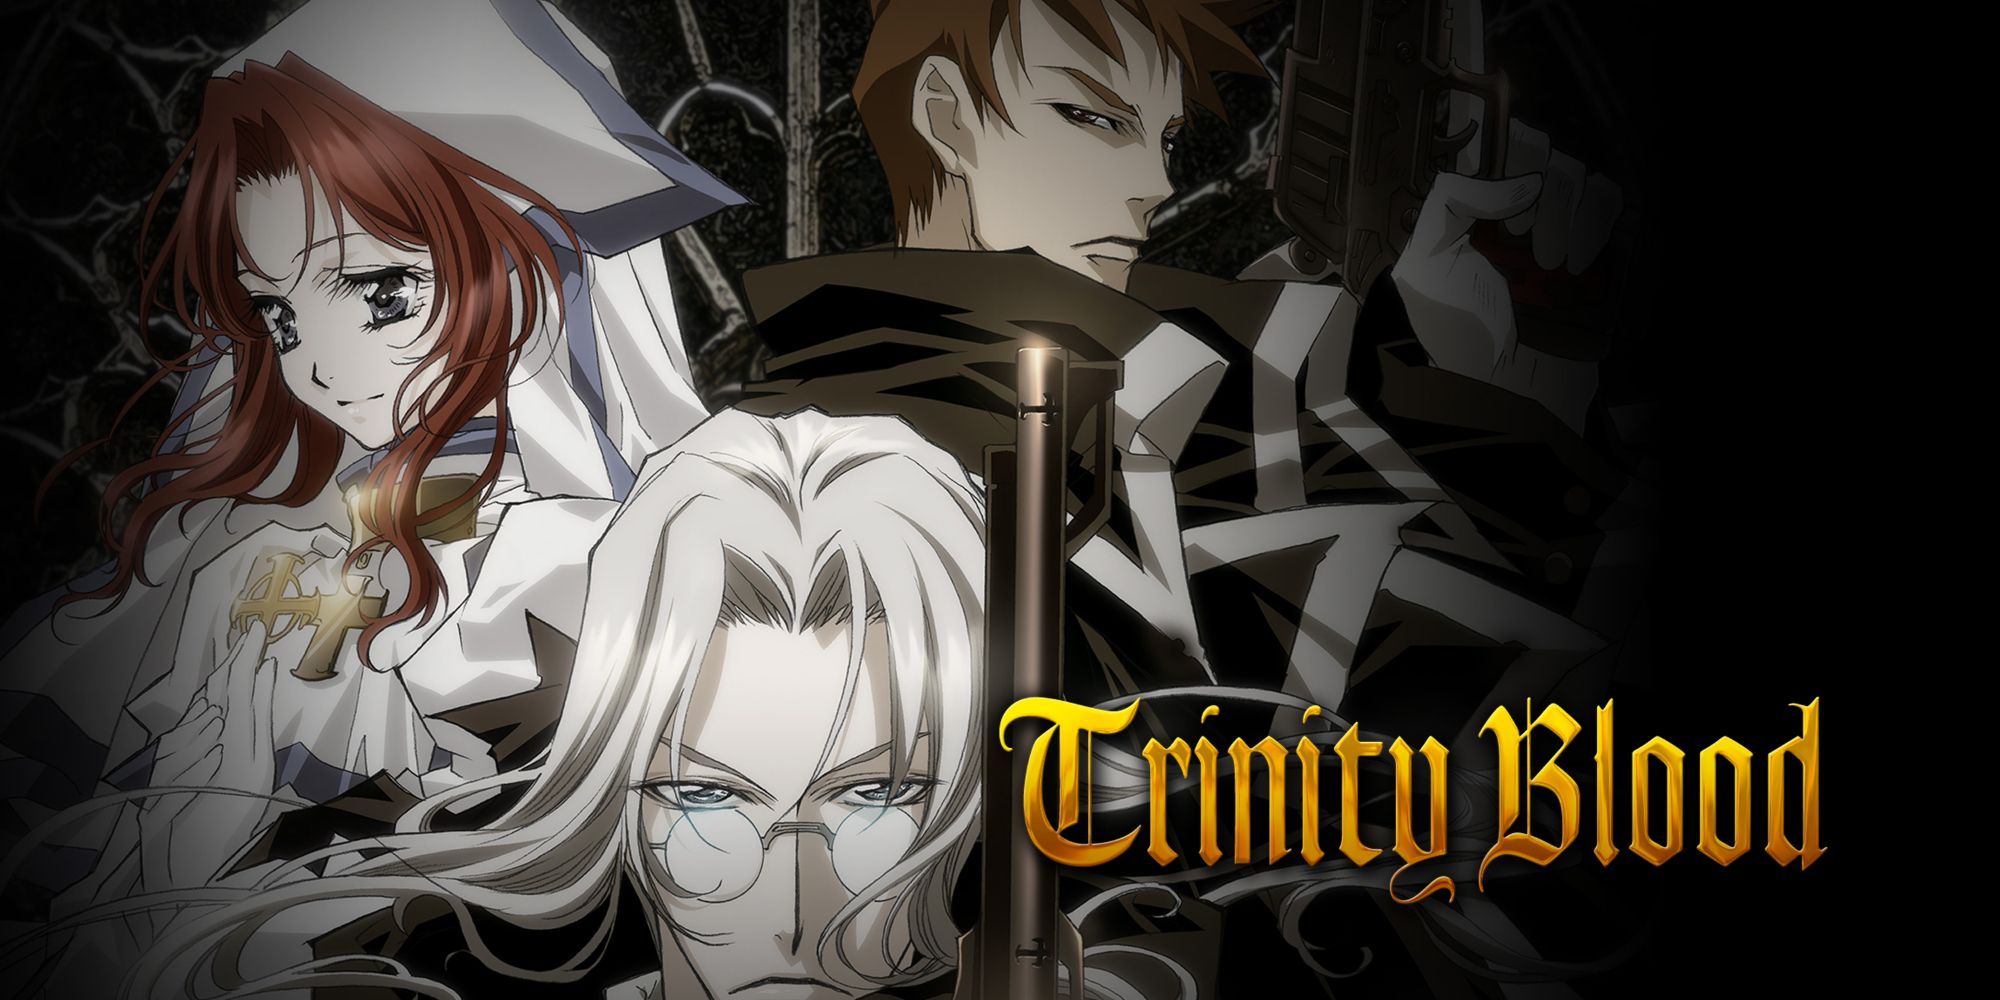 The title card from Trinity Blood